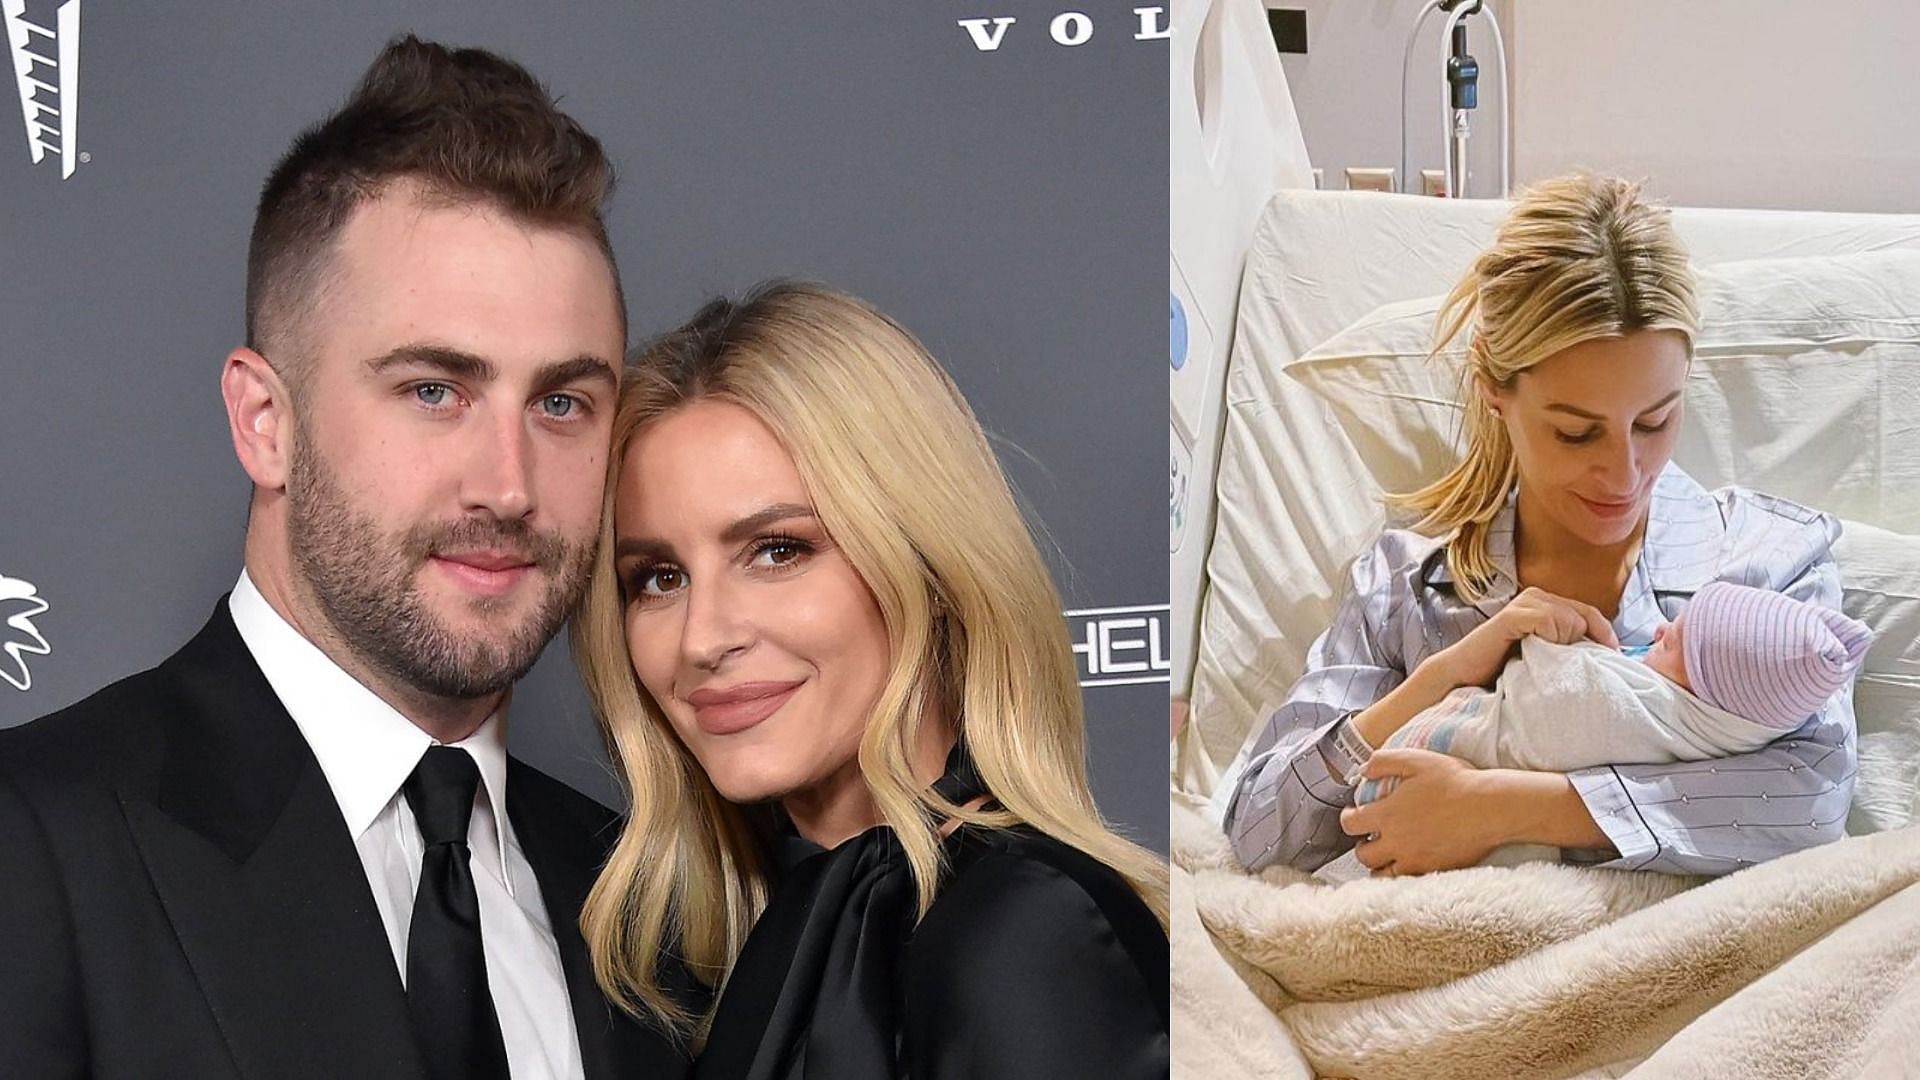 Morgan Stewart and Jordan McGraw are now parents to two babies (Images via AFF-USA/Shutterstock and @morganstewart/Instagram)